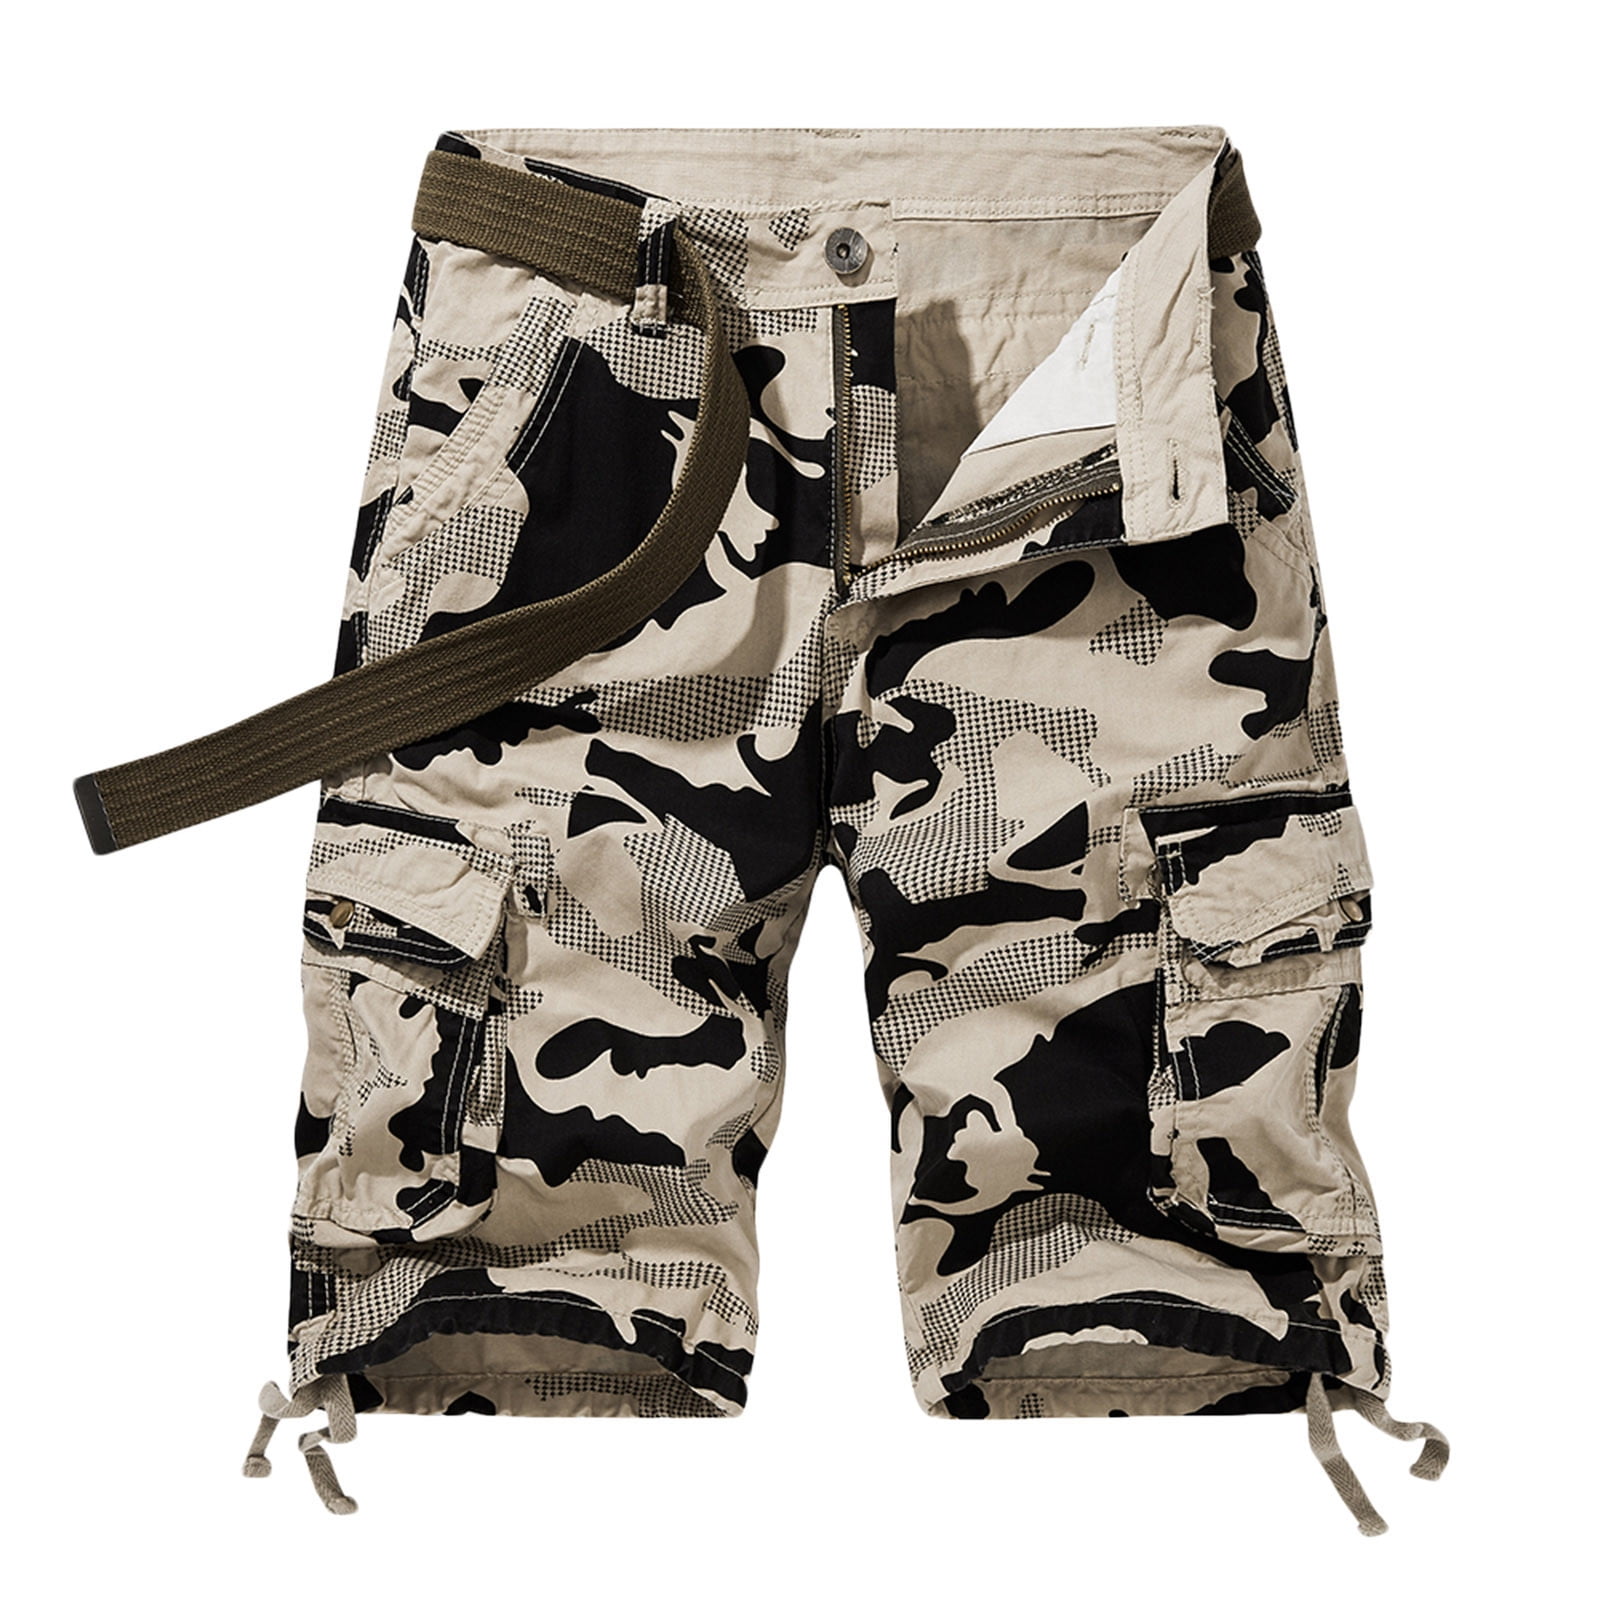 Clearance RYRJJ Men's Cargo Shorts Relaxed Fit Camouflage Short